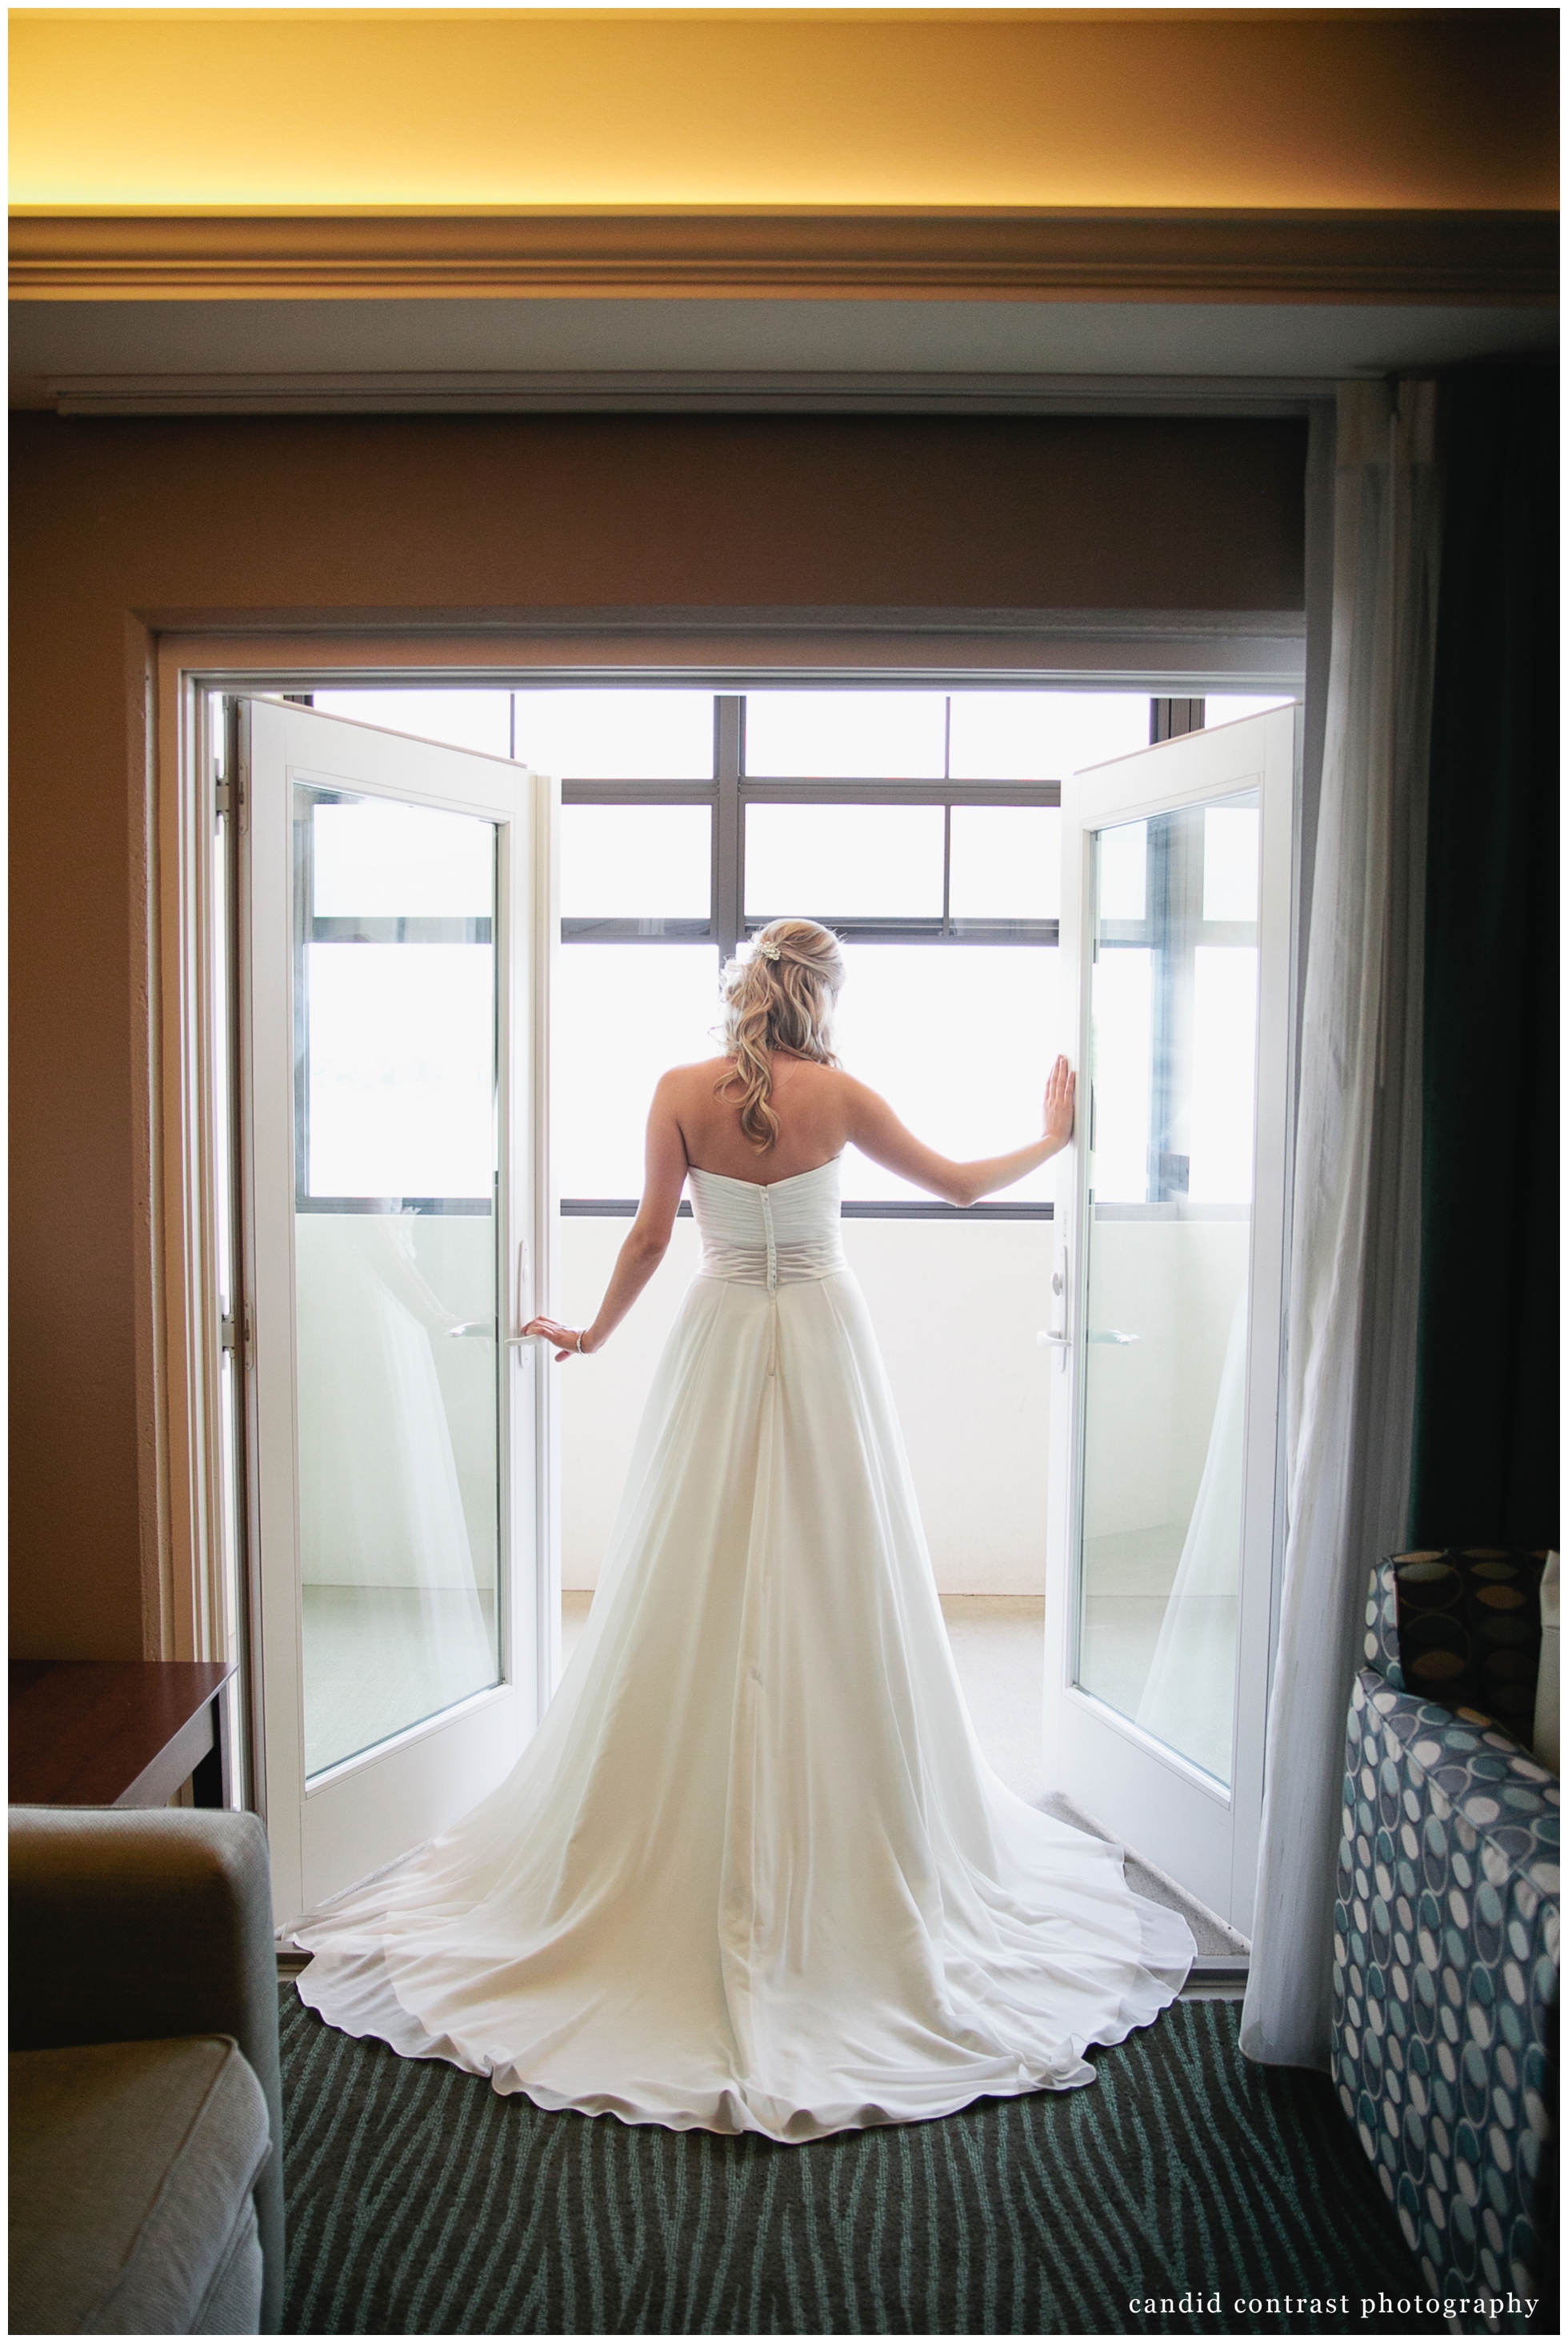 getting ready for Bellevue Iowa wedding at The Shore Event Centre, bride silhouette in doorway, iowa wedding photographer candid contrast photography